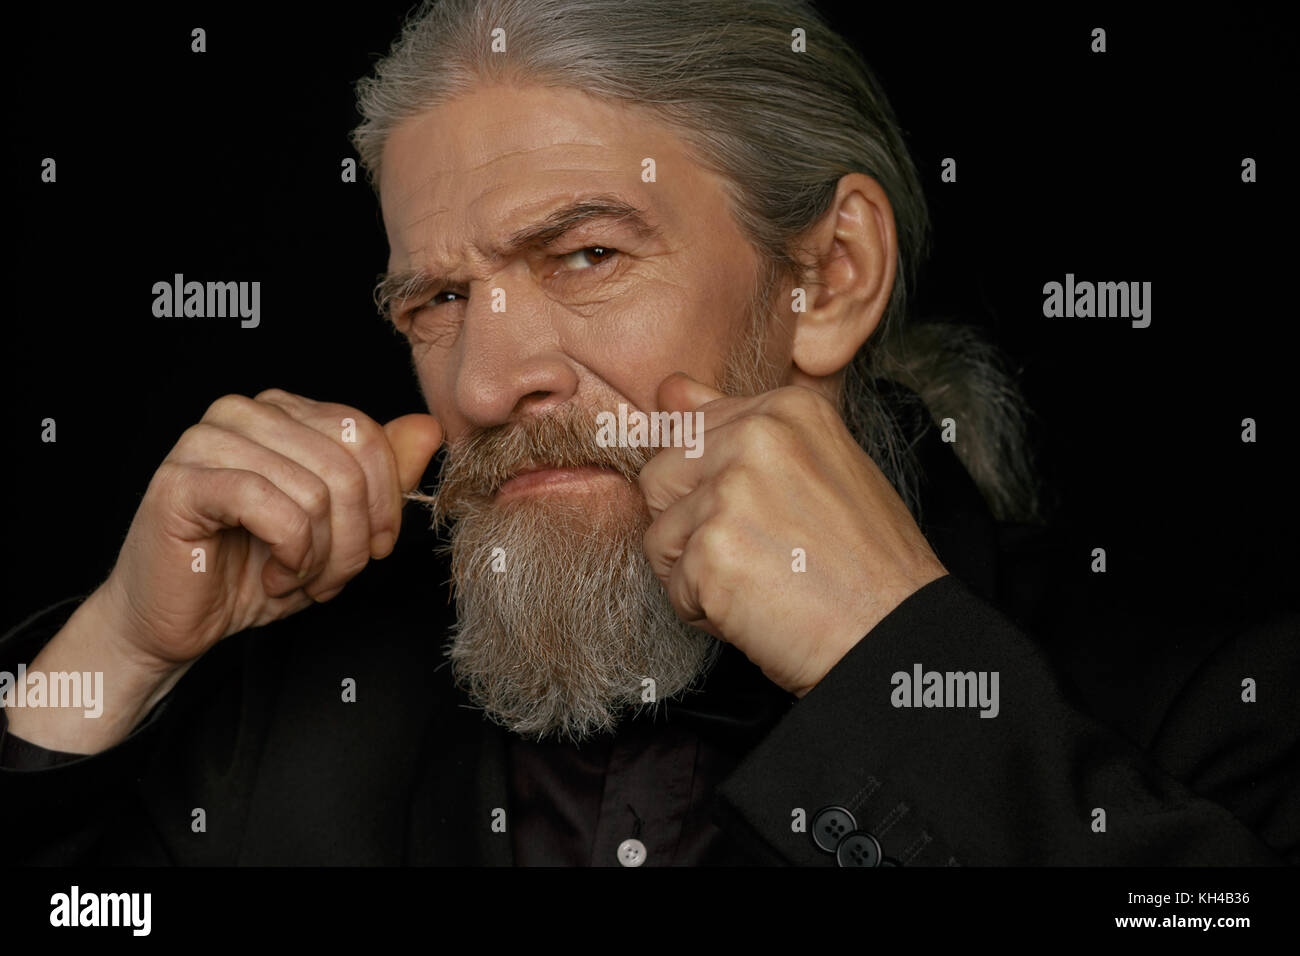 Strict look of very old beardy man. Stock Photo